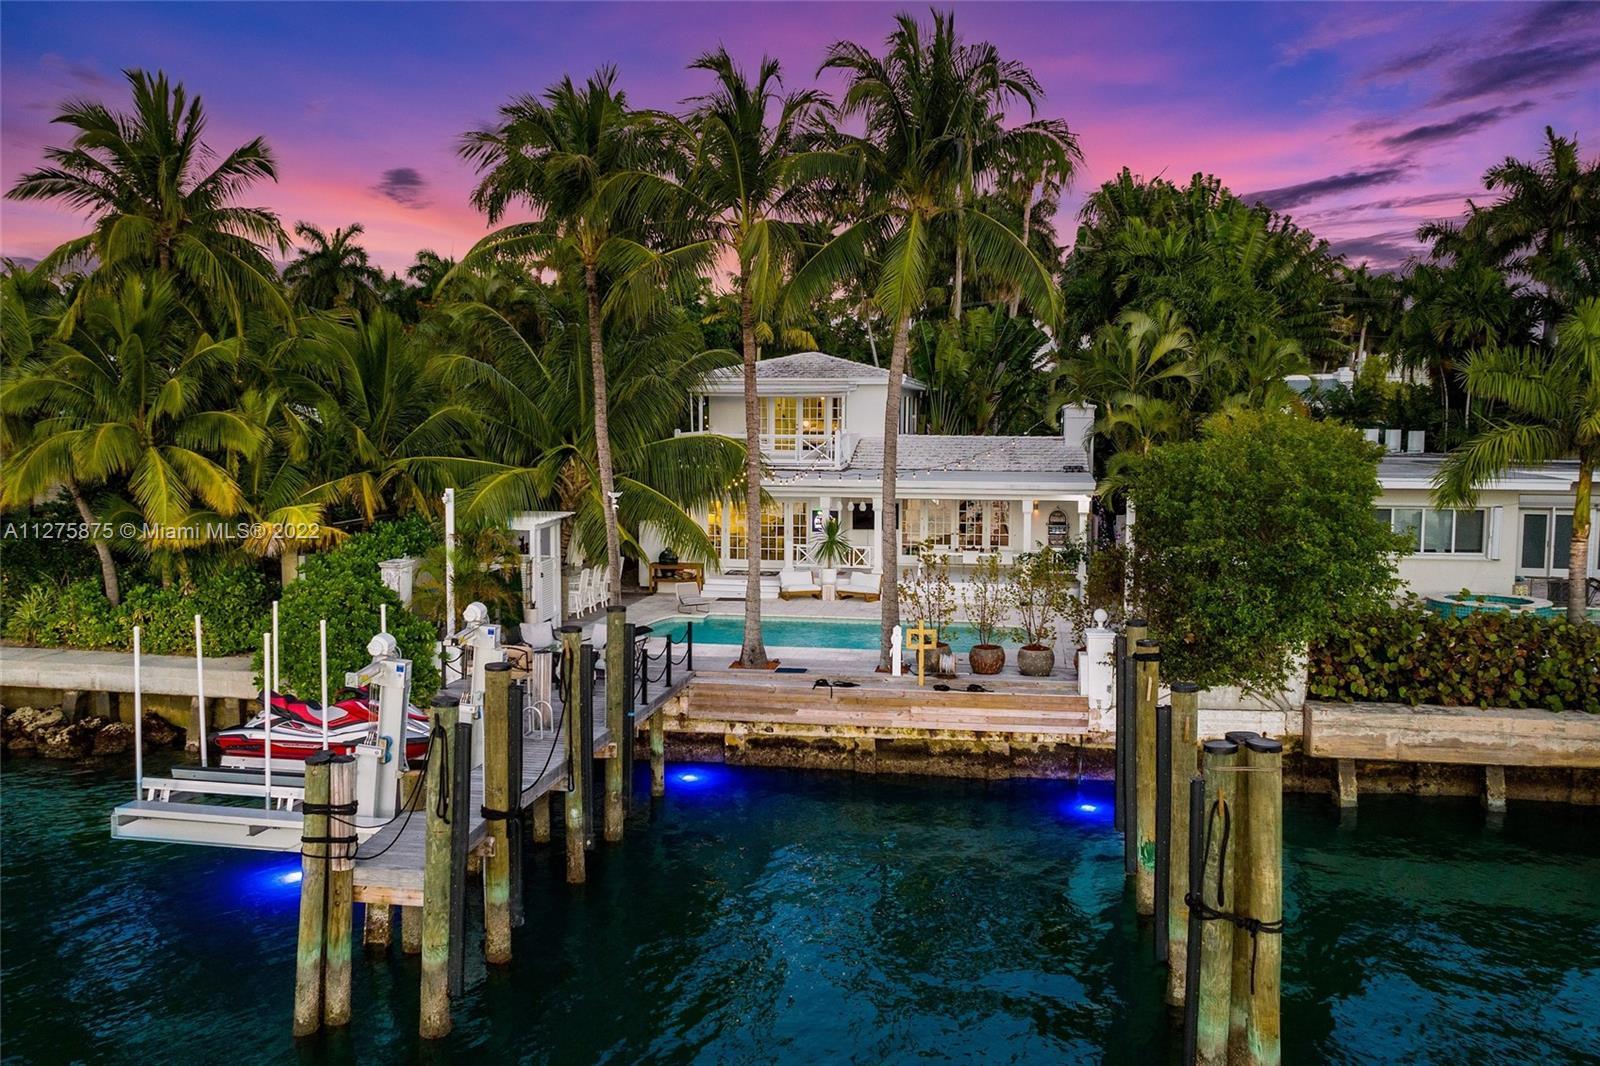 Located on the prestigious Venetian Islands, this waterfront home offers immaculate views of Port of